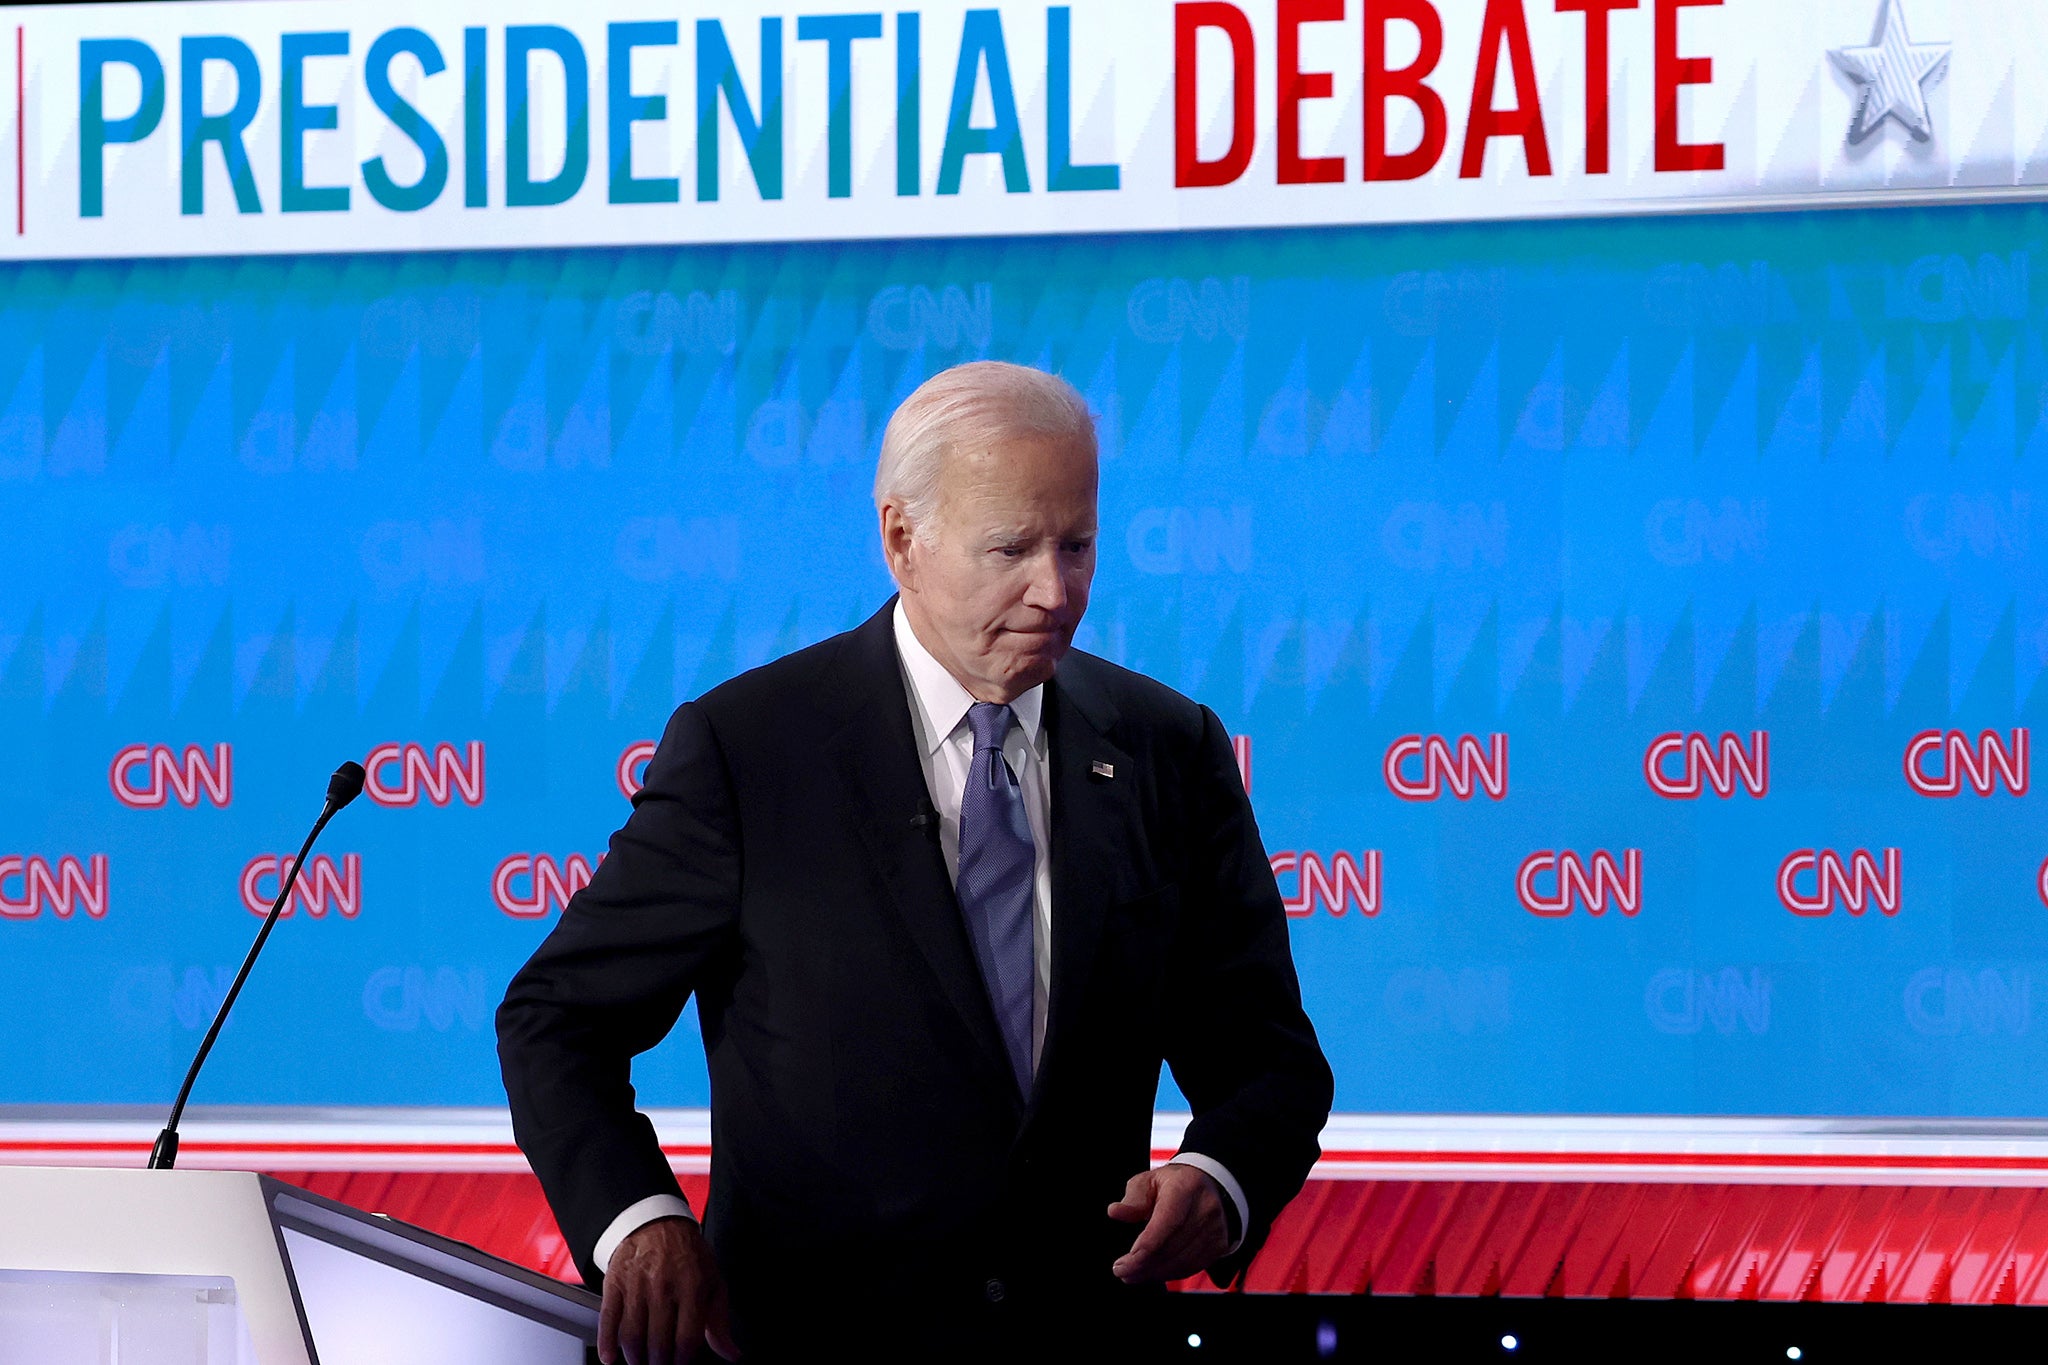 Biden, while a very experienced politician who knows his issues well, has a problem with age. And it was a problem which prevented him from expressing himself clearly and correctly